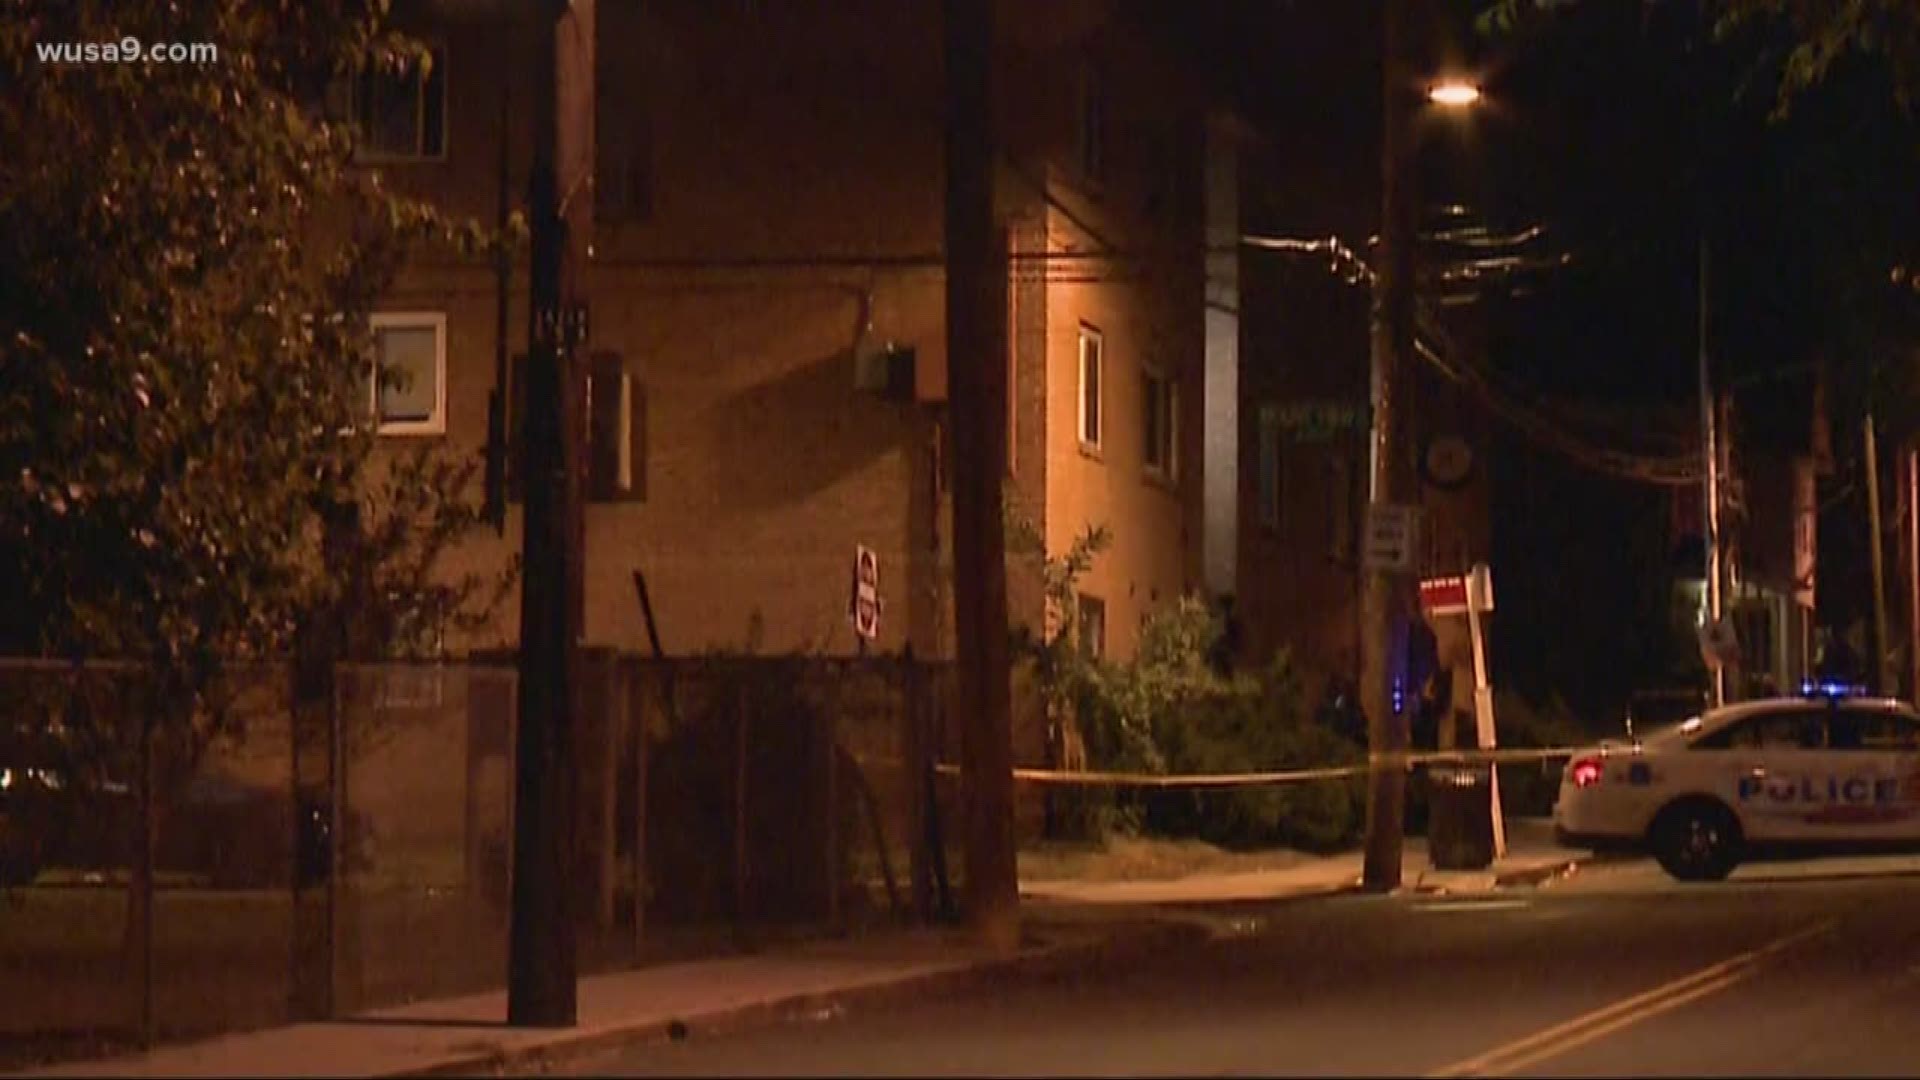 One person died after a triple shooting in Southeast DC. Officials said the other two victims are juveniles.